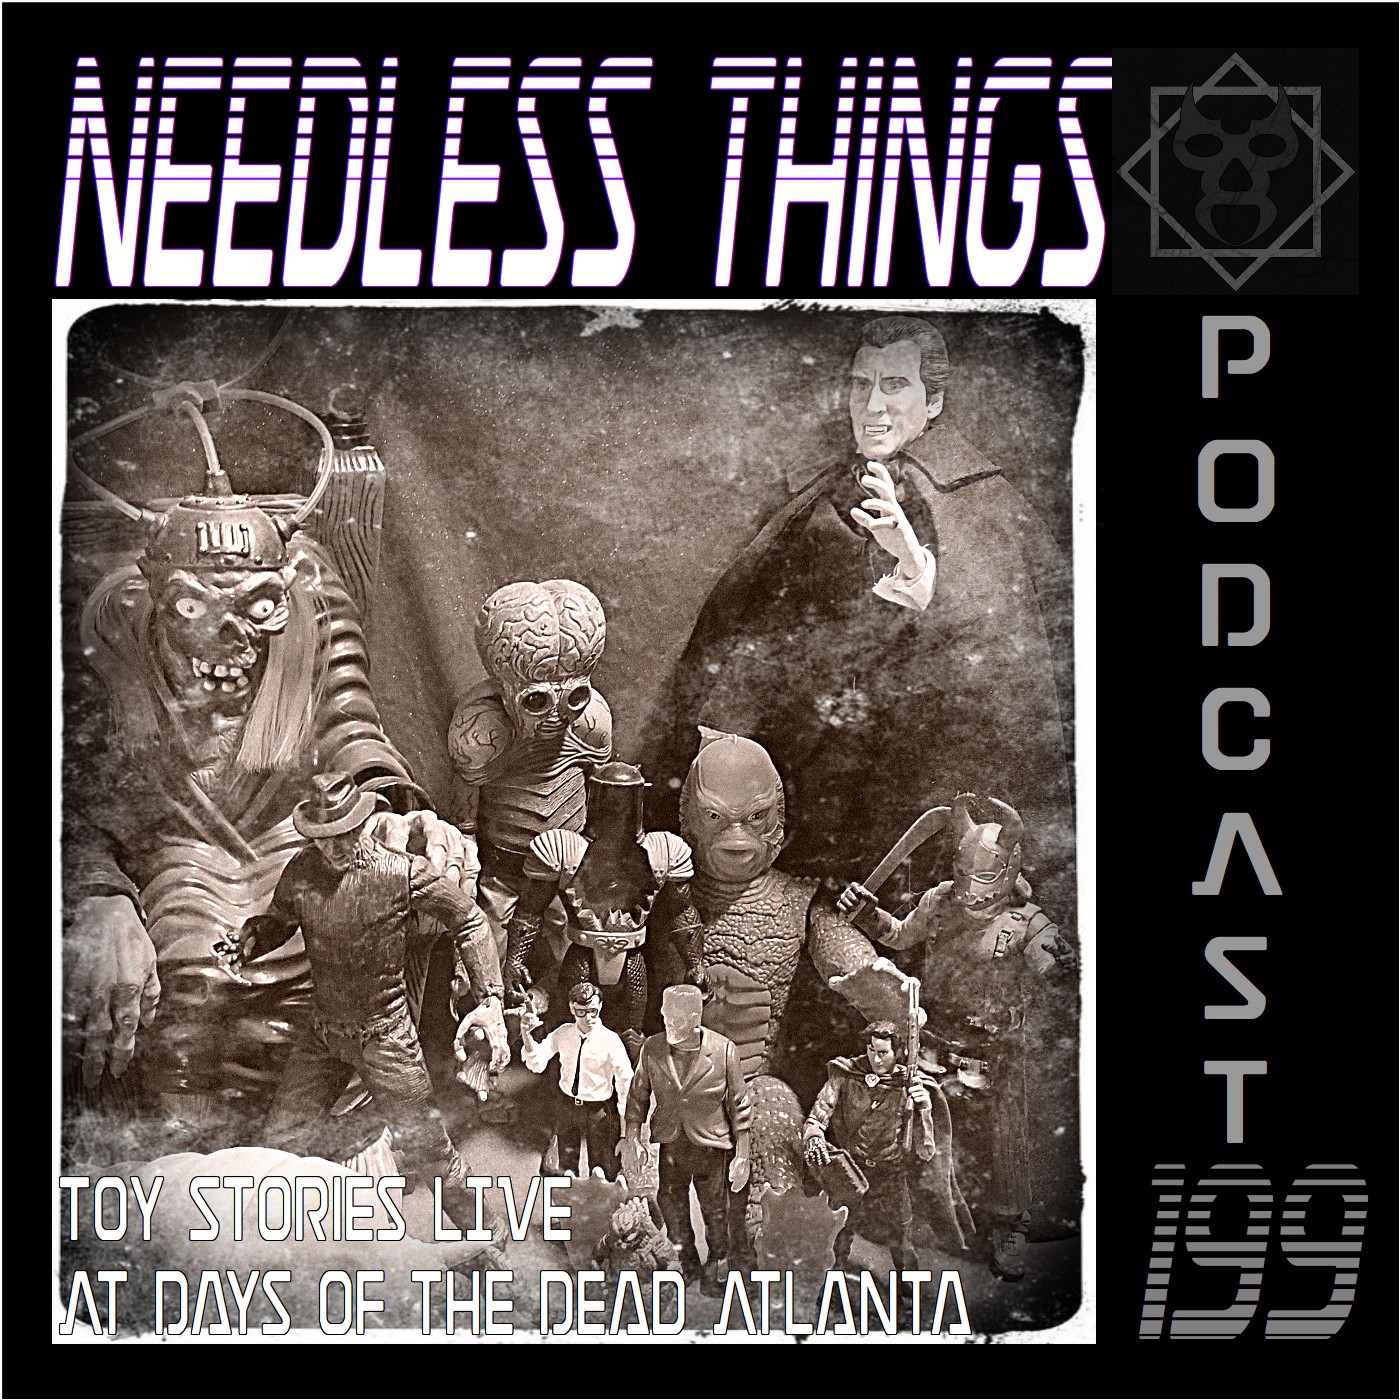 Needless Things Podcast 199 – Toy Stories LIVE at Days of the Dead Atlanta